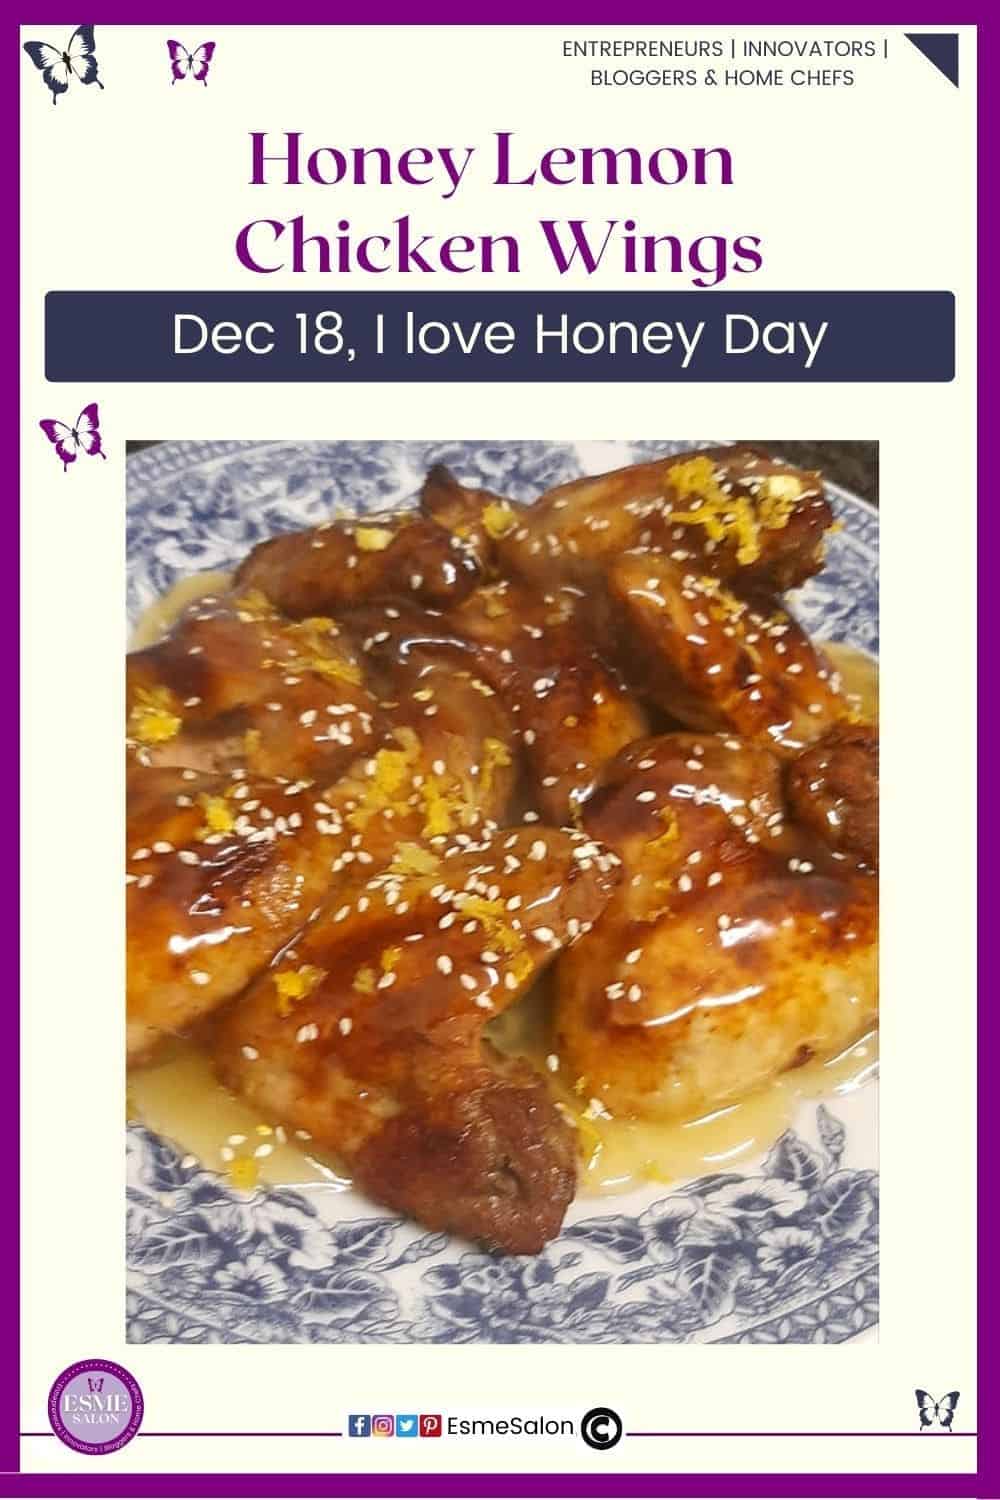 an image of a blue delft plate with Honey Lemon Chicken Wings with sesame seeds and lemon rind